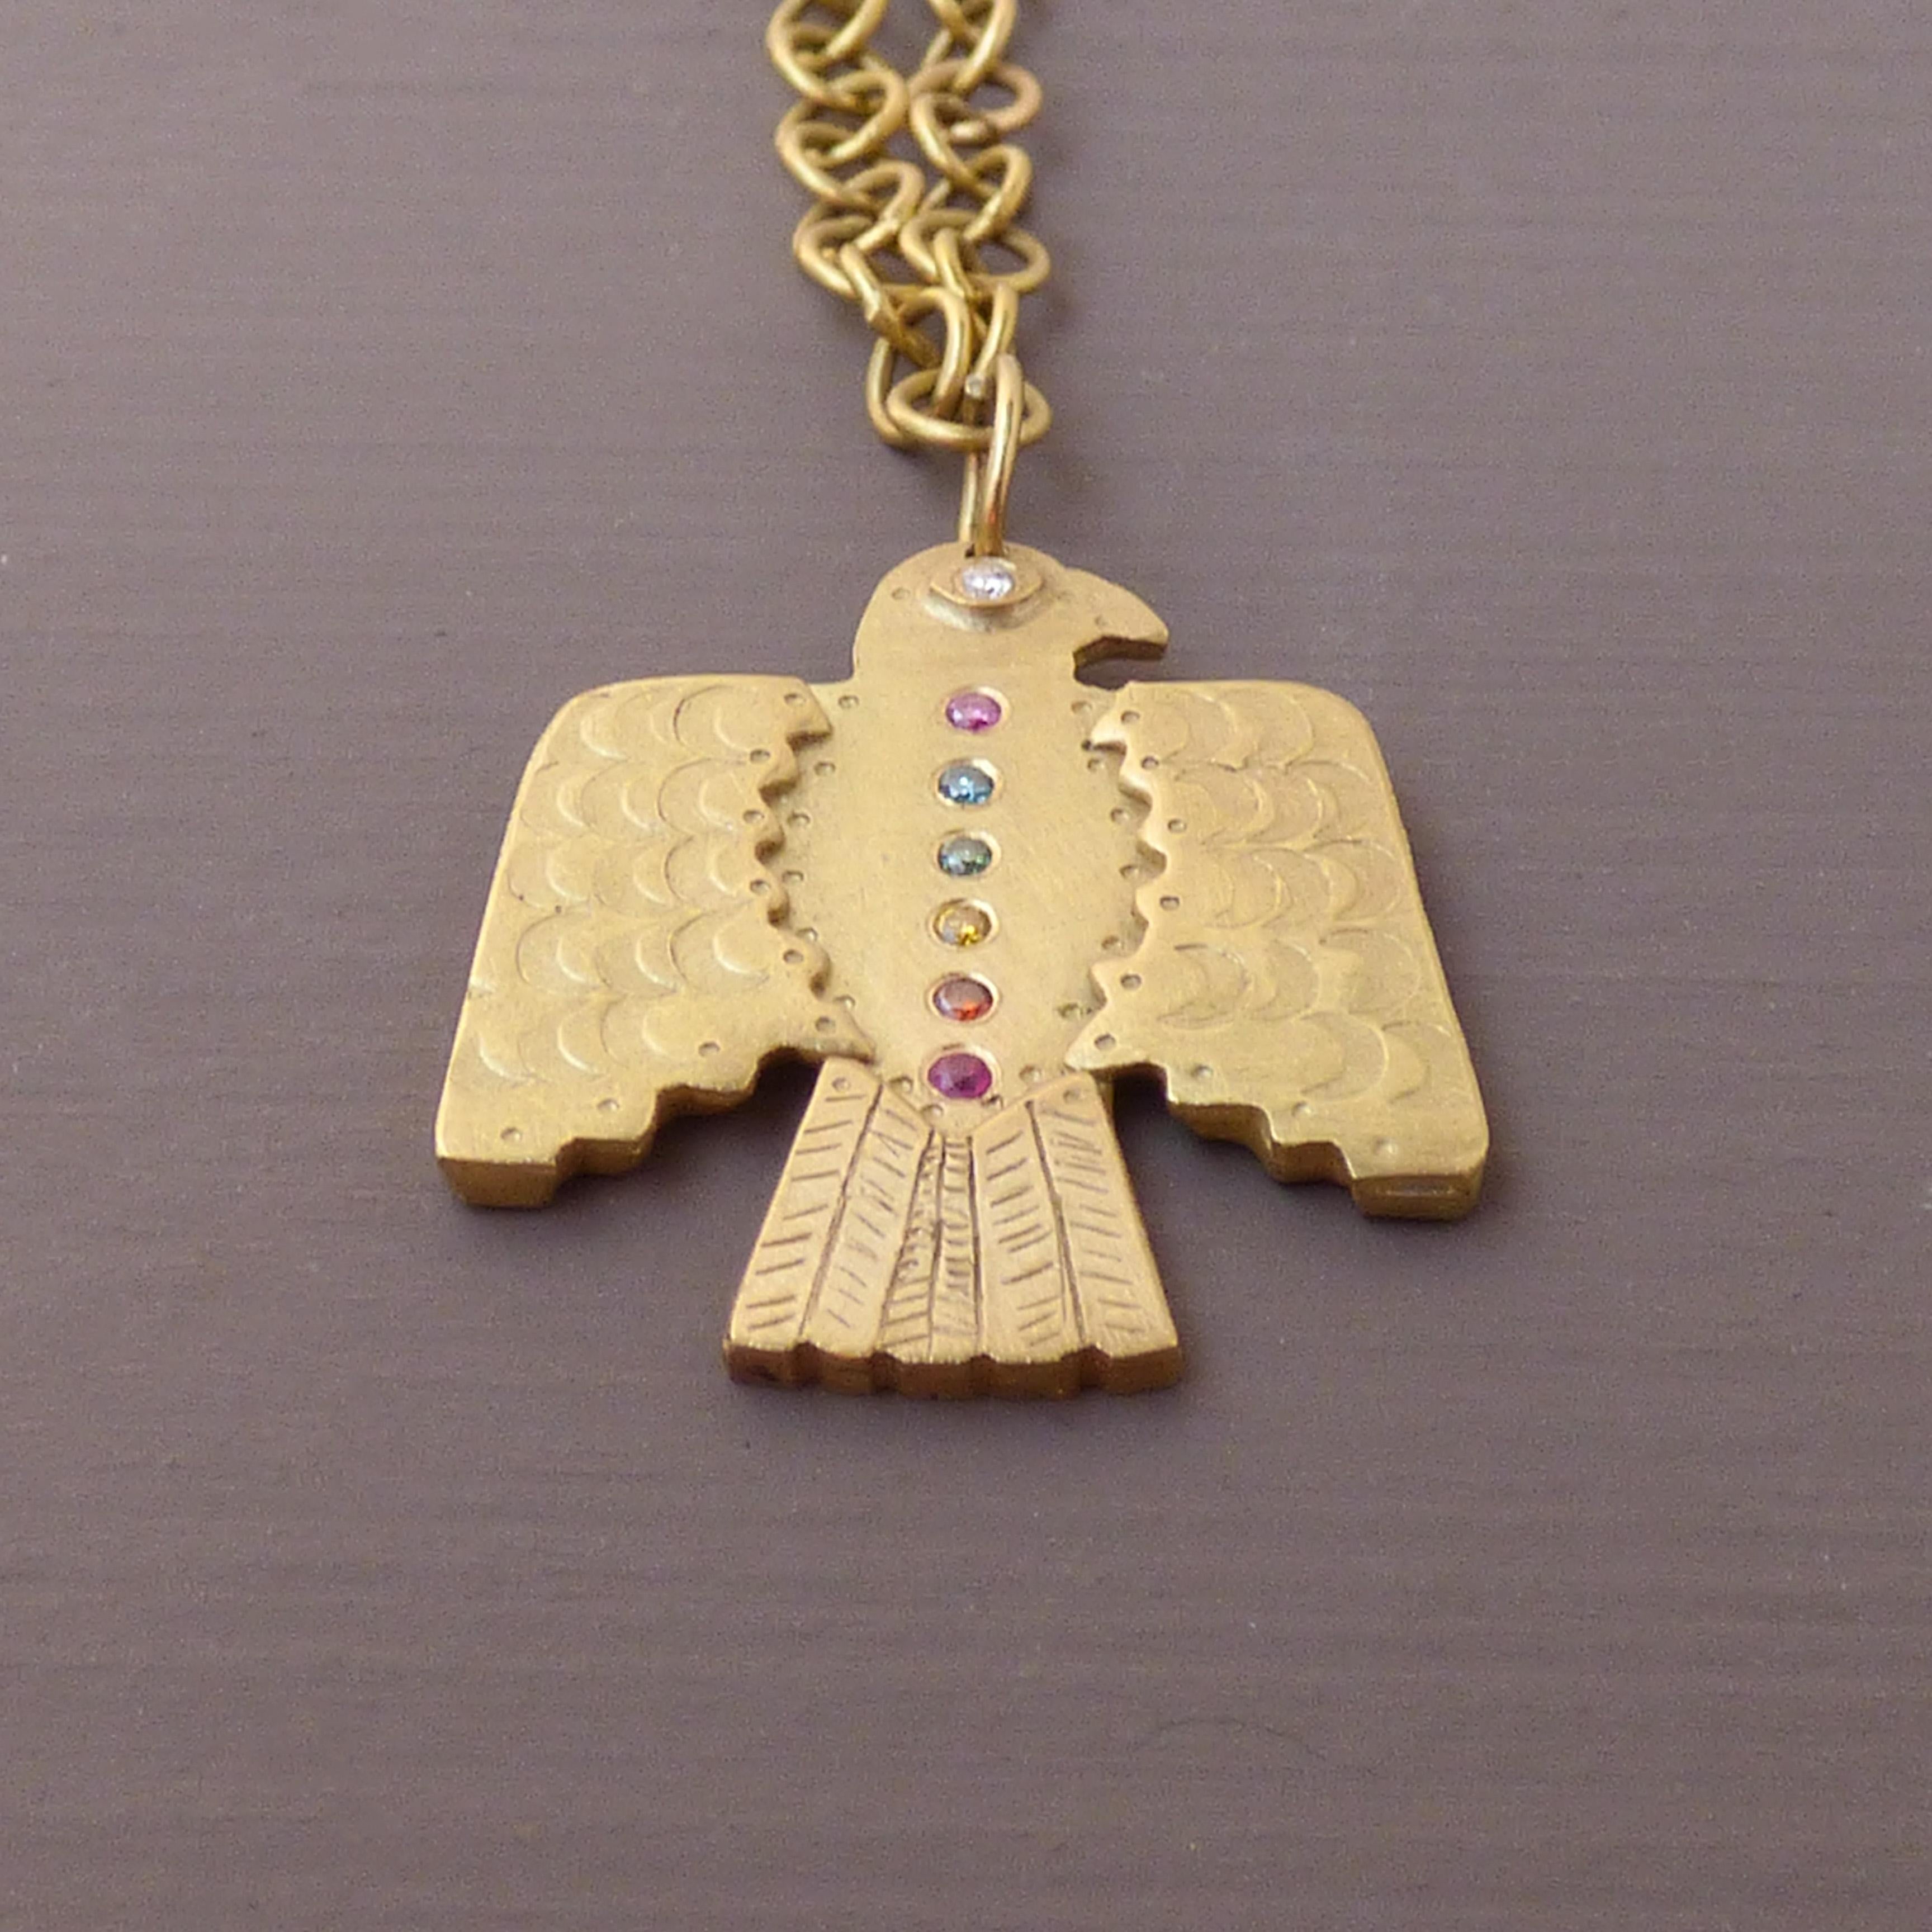 The Thunderbird ethical amulet is handmade with 18ct Fairtrade gold from Peru and ethically sourced rainbow diamonds and a ruby.

The Thunderbird is a powerful amulet that represents strength and power as well as offering protection.

Inspired by